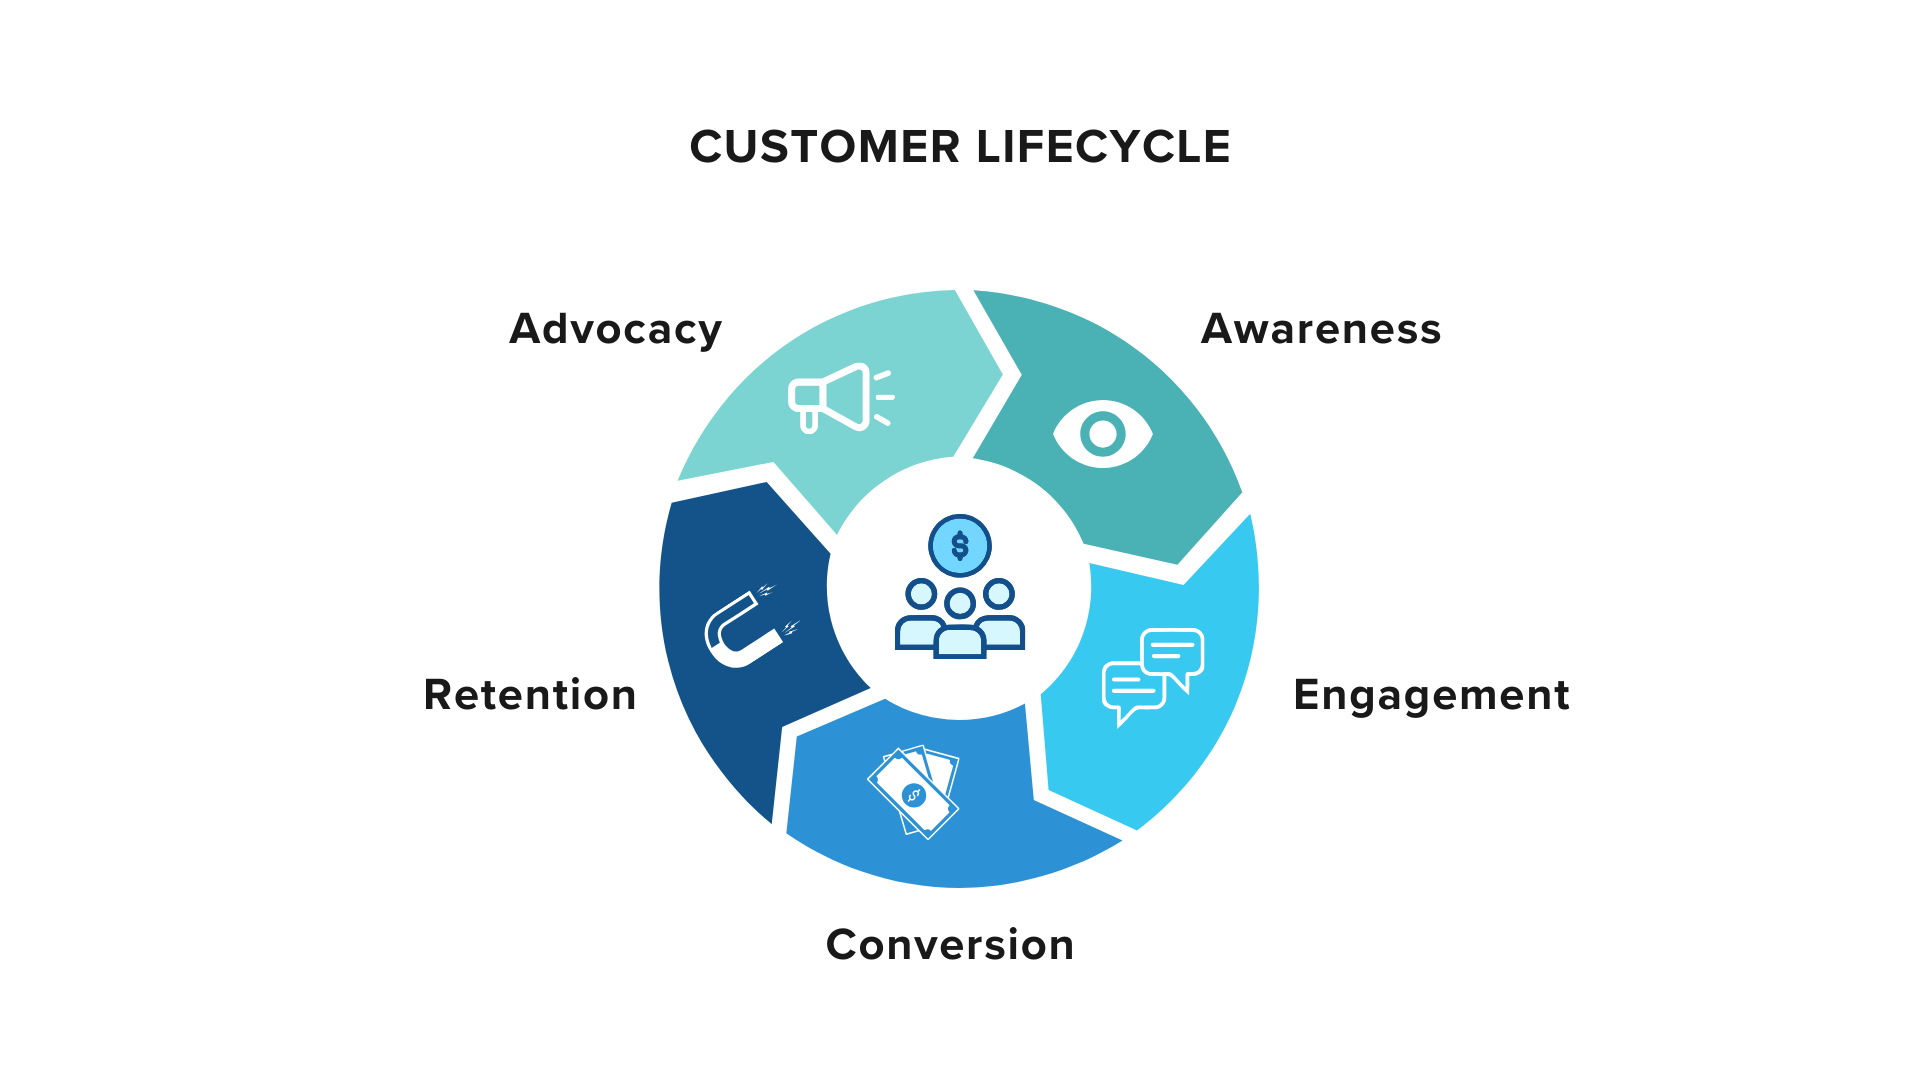 Customer lifecycle management stages